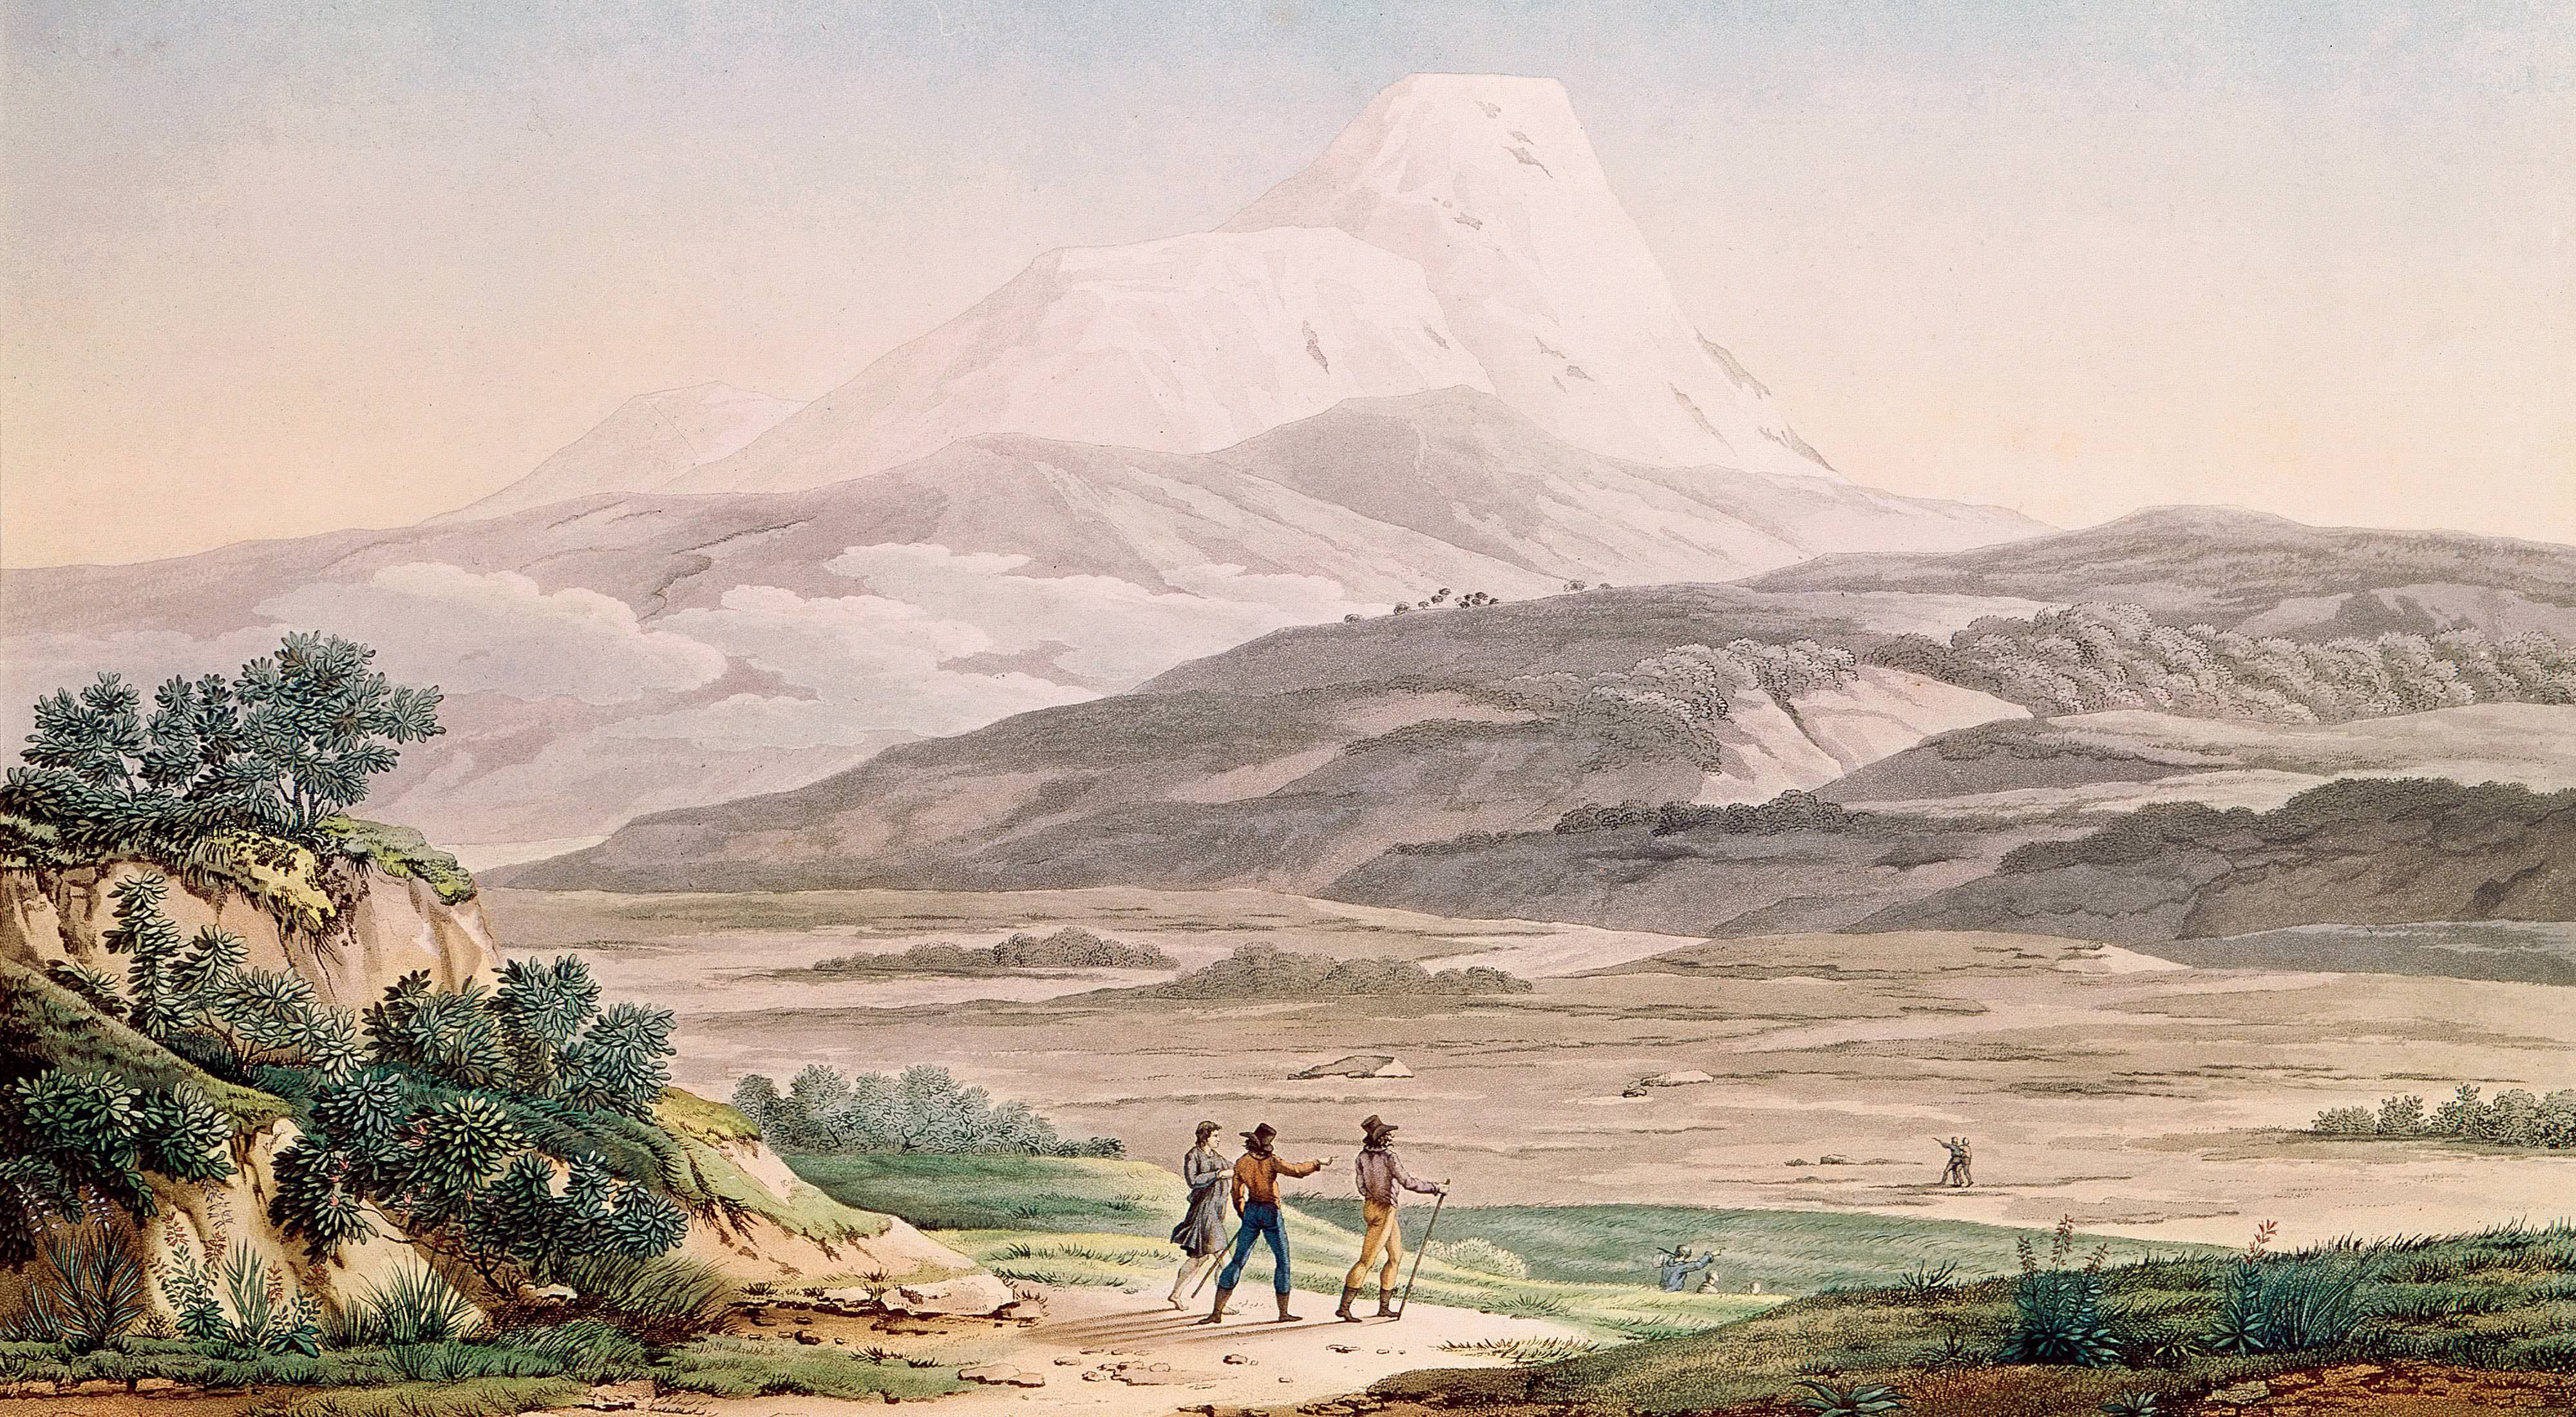 A print from 1814 shows Alexander von Humboldt and his companions exploring Ecuador